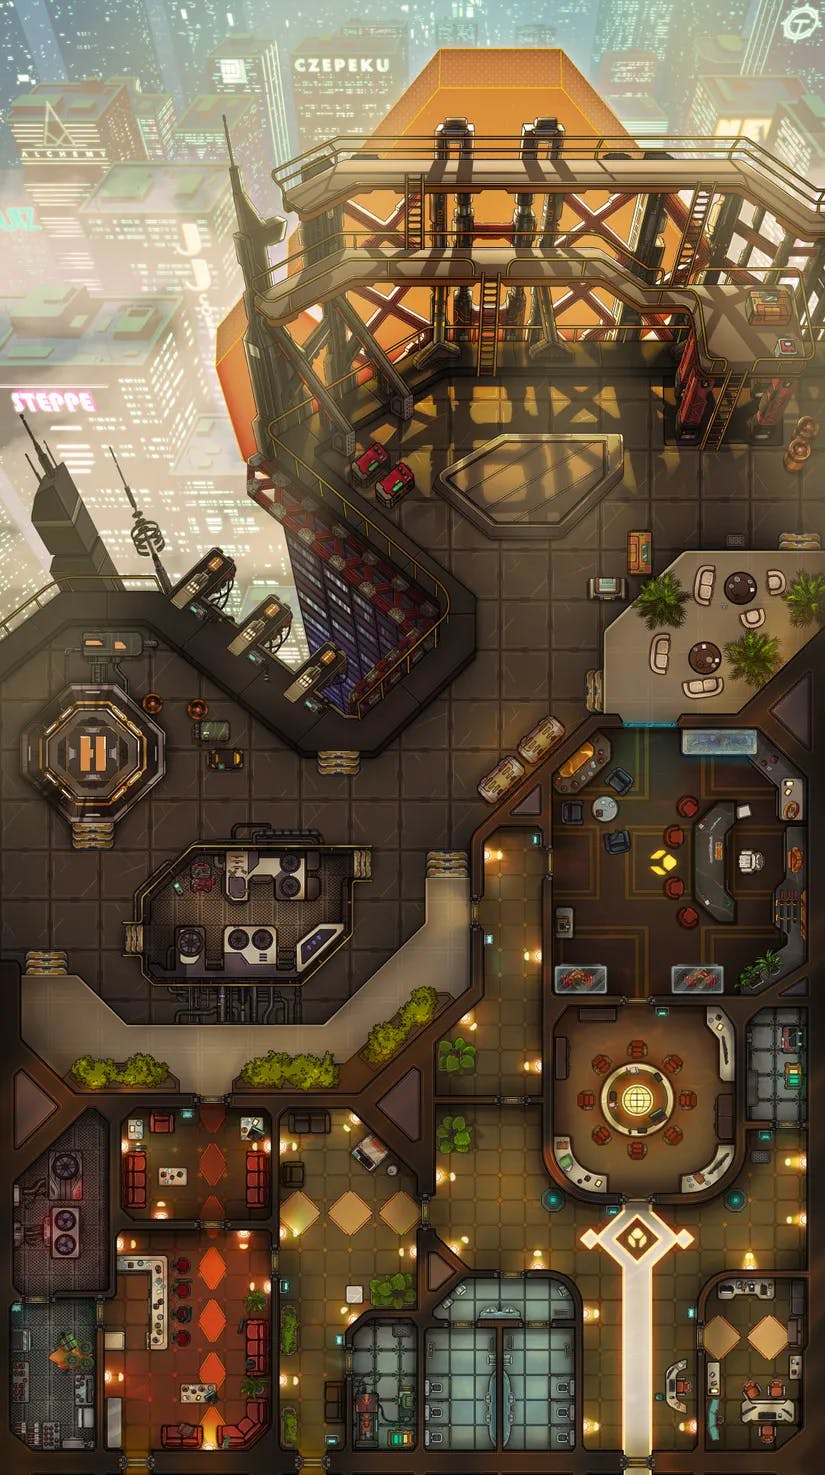 Corp Tower map, Original Day variant